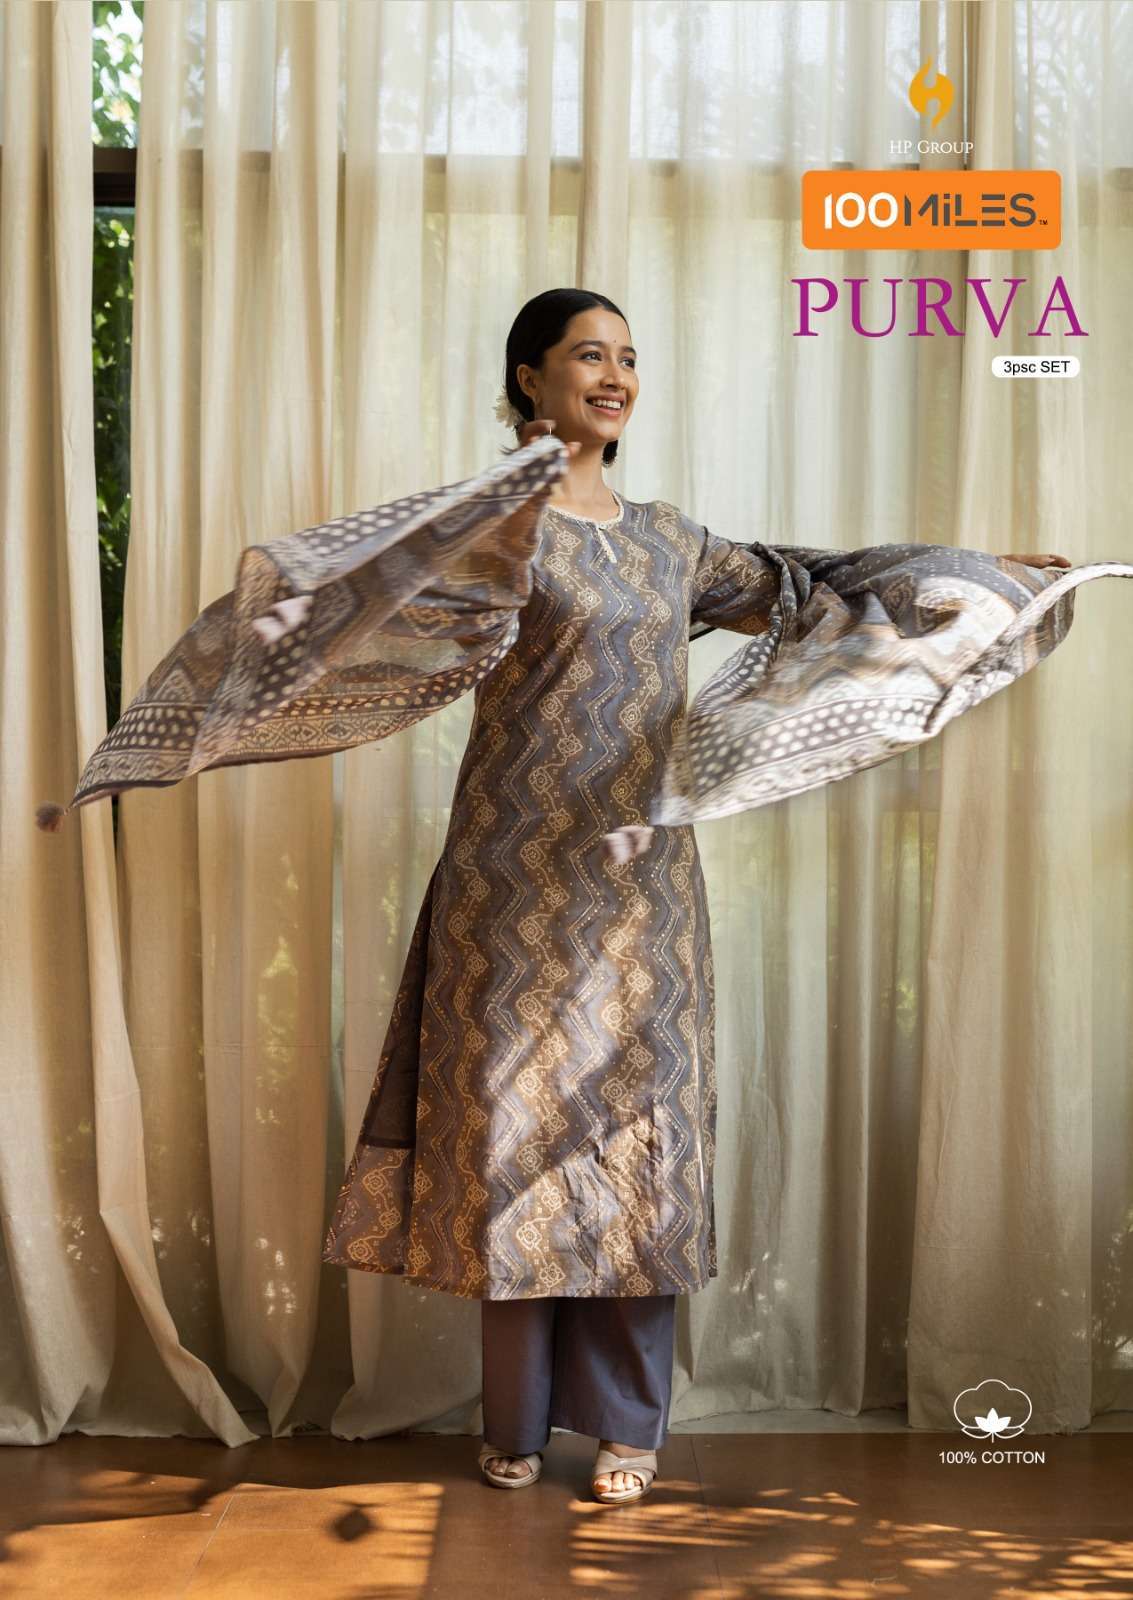 100 miles purva series 01-04 pure cotton readymade suit 